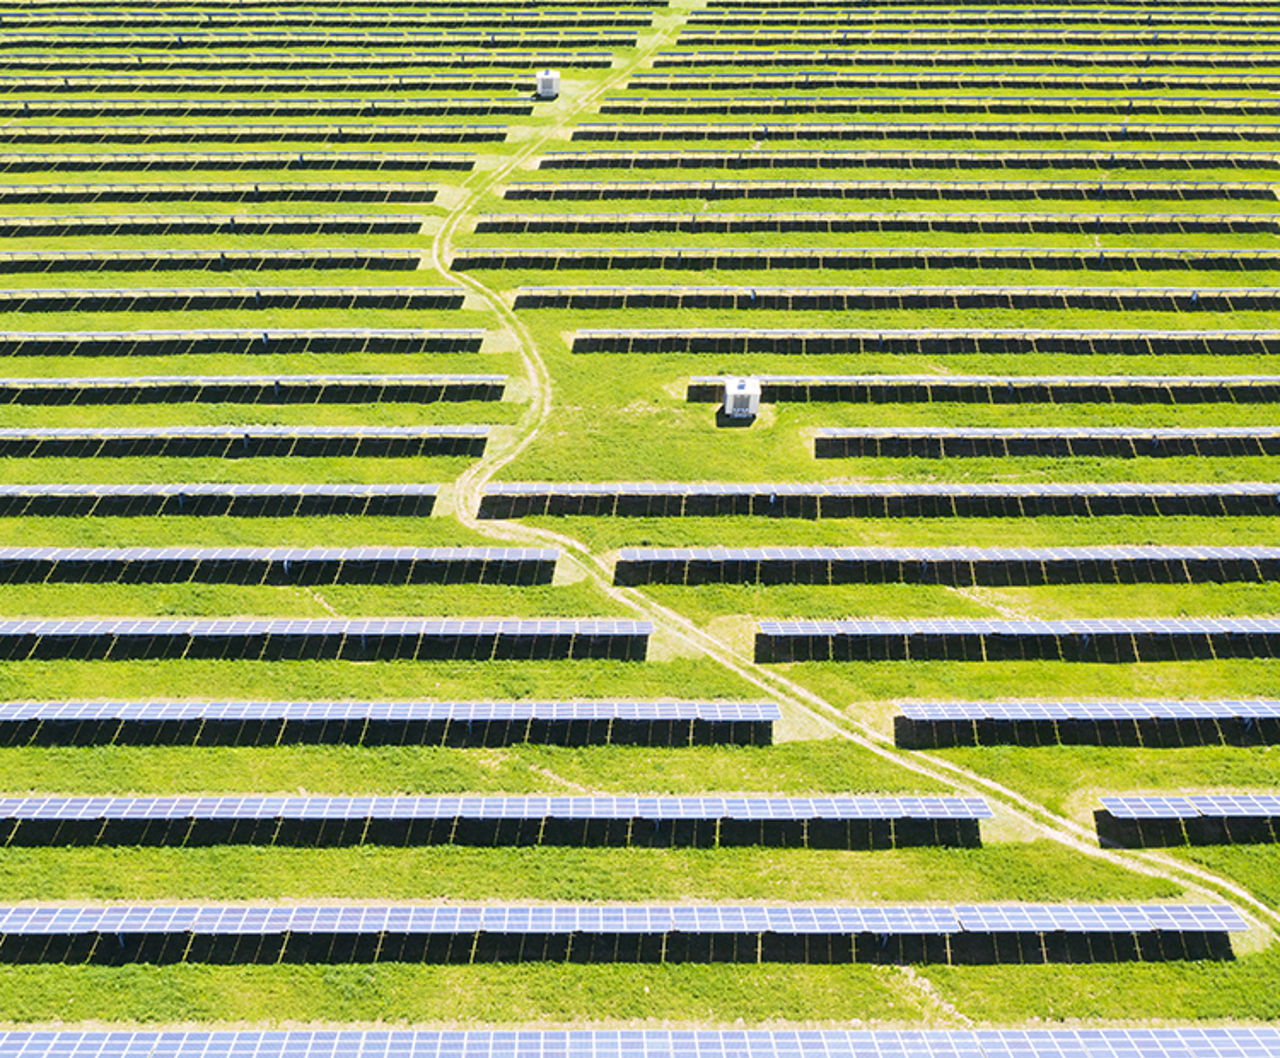 Solar power plant seen from above in green field